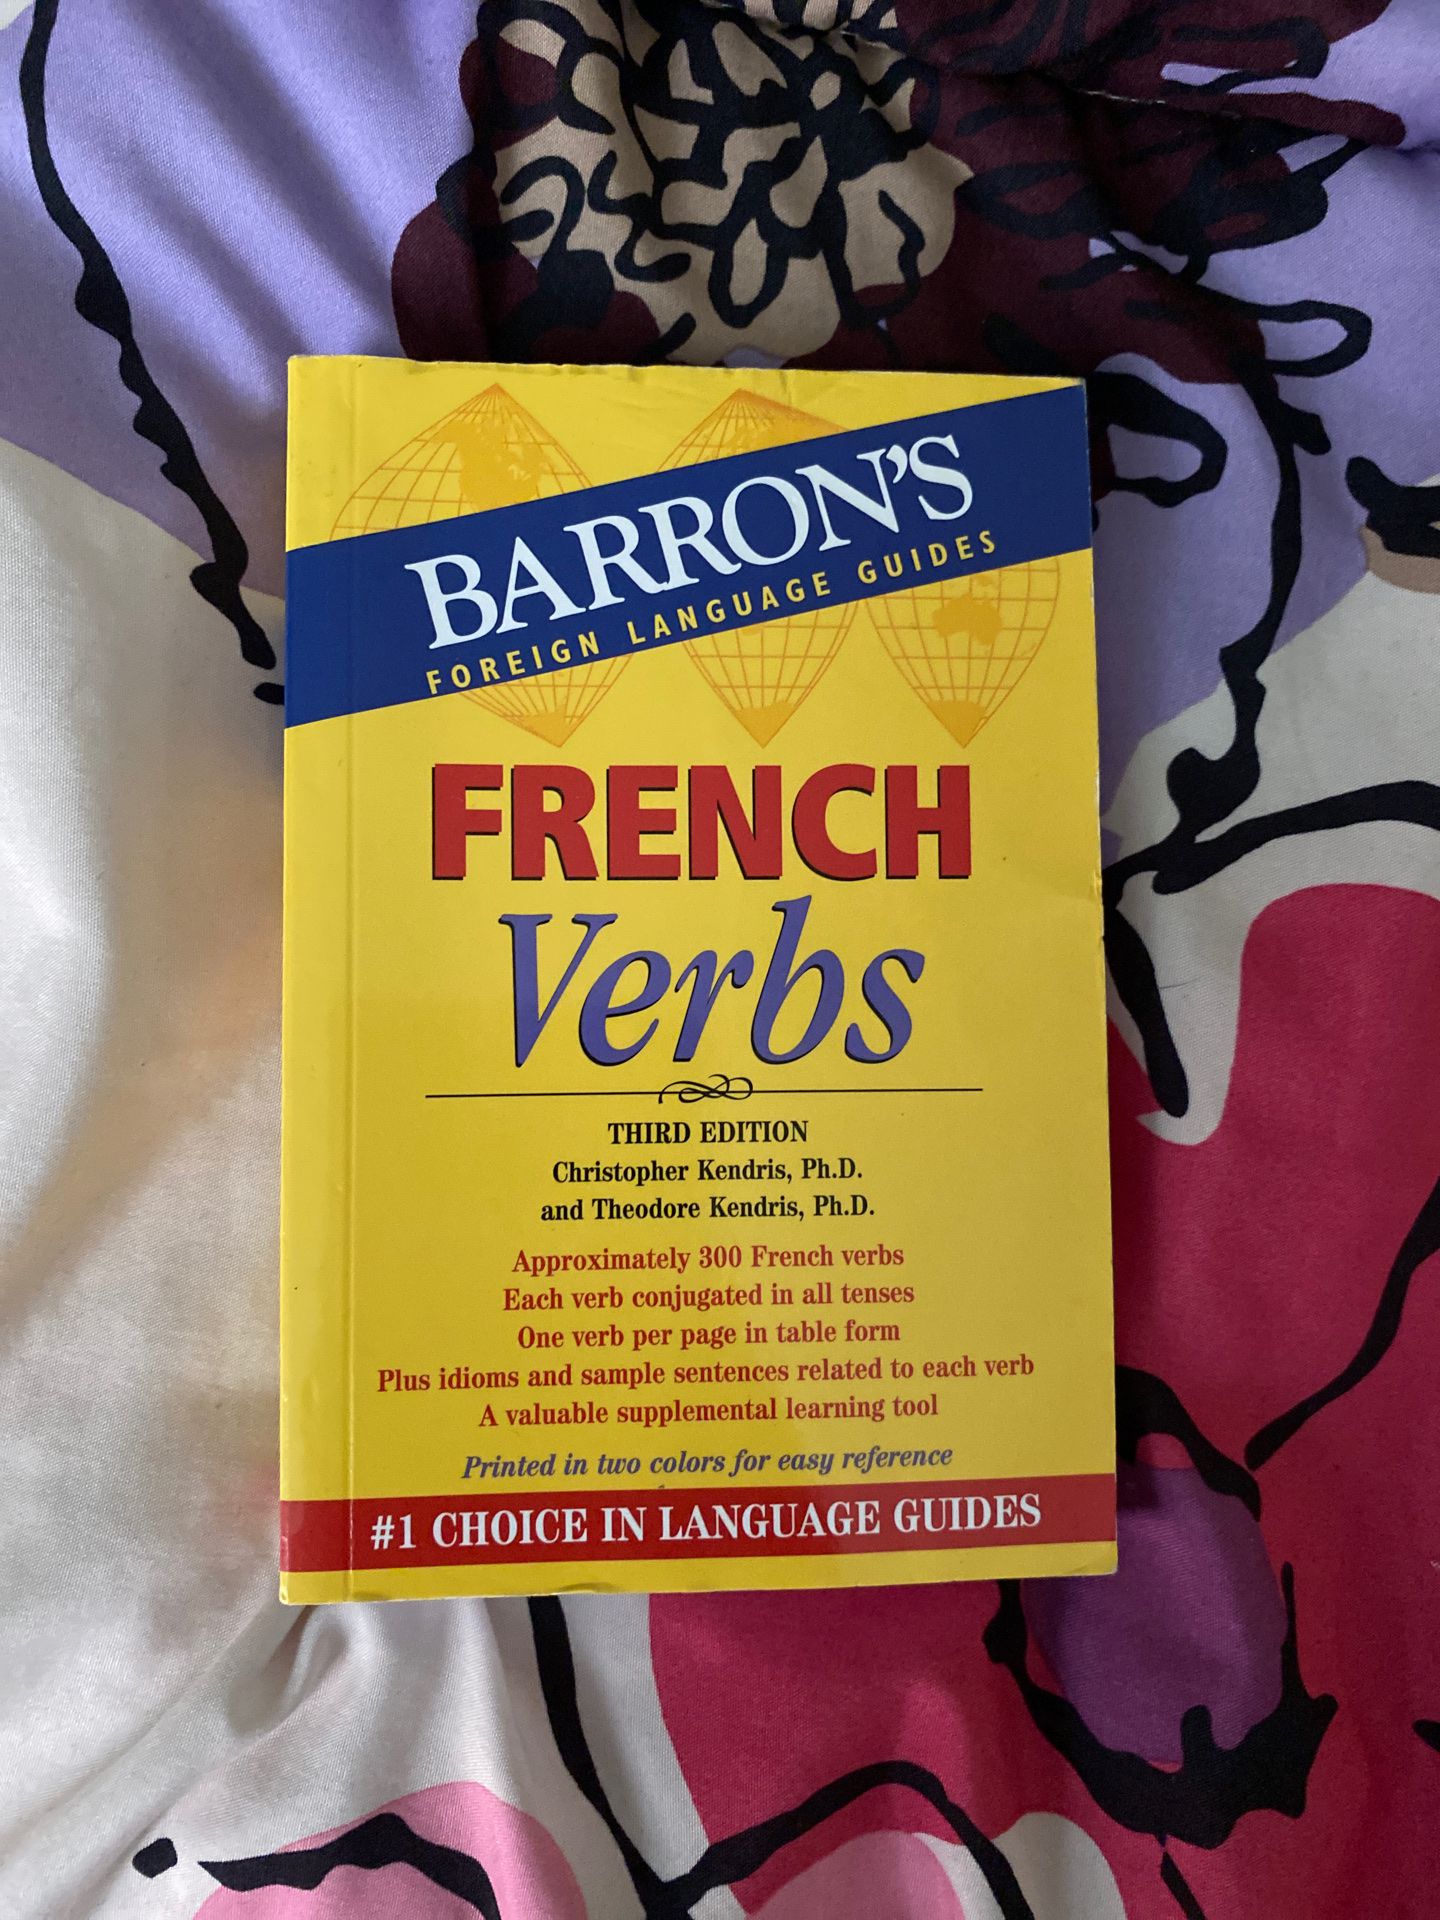 French dictionary & French verbs book